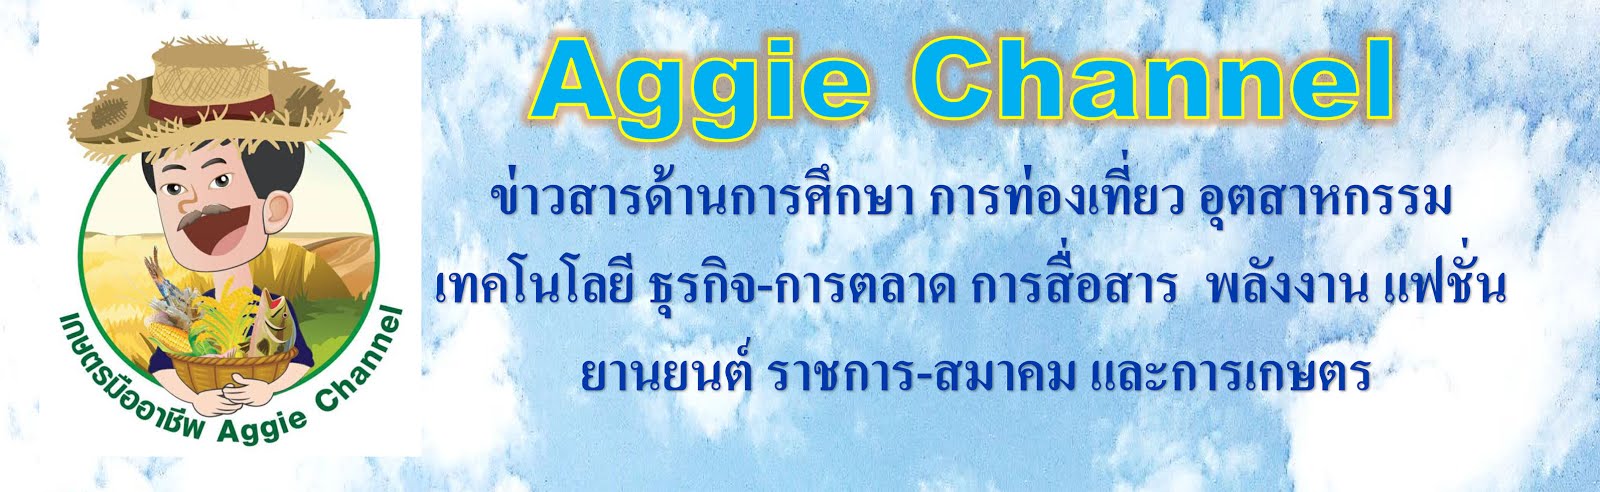 Aggie Channel